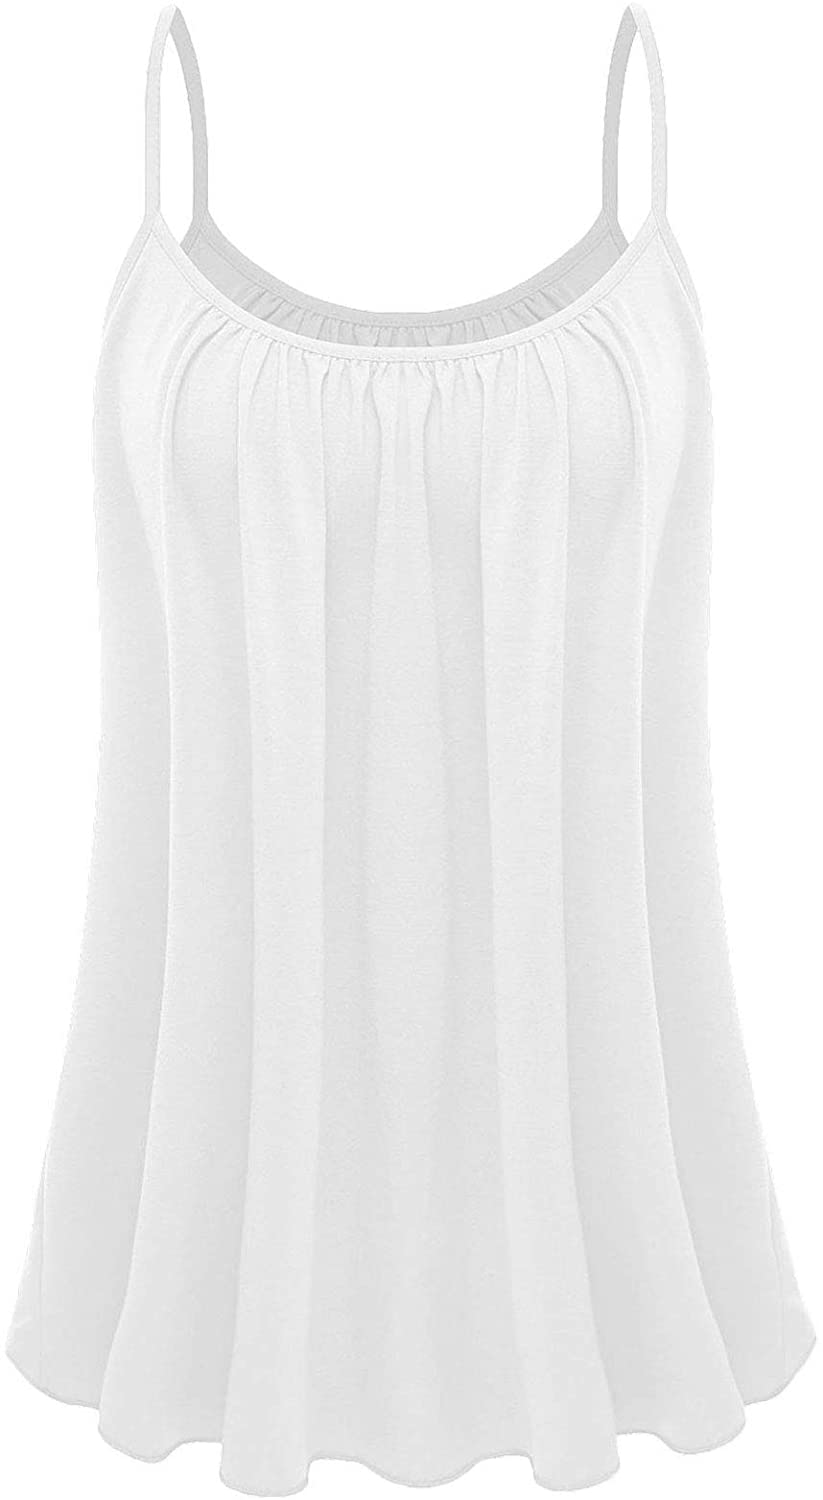 7th Element Plus Size Cami Basic Camisole Tank Top Womens T-Shirt 